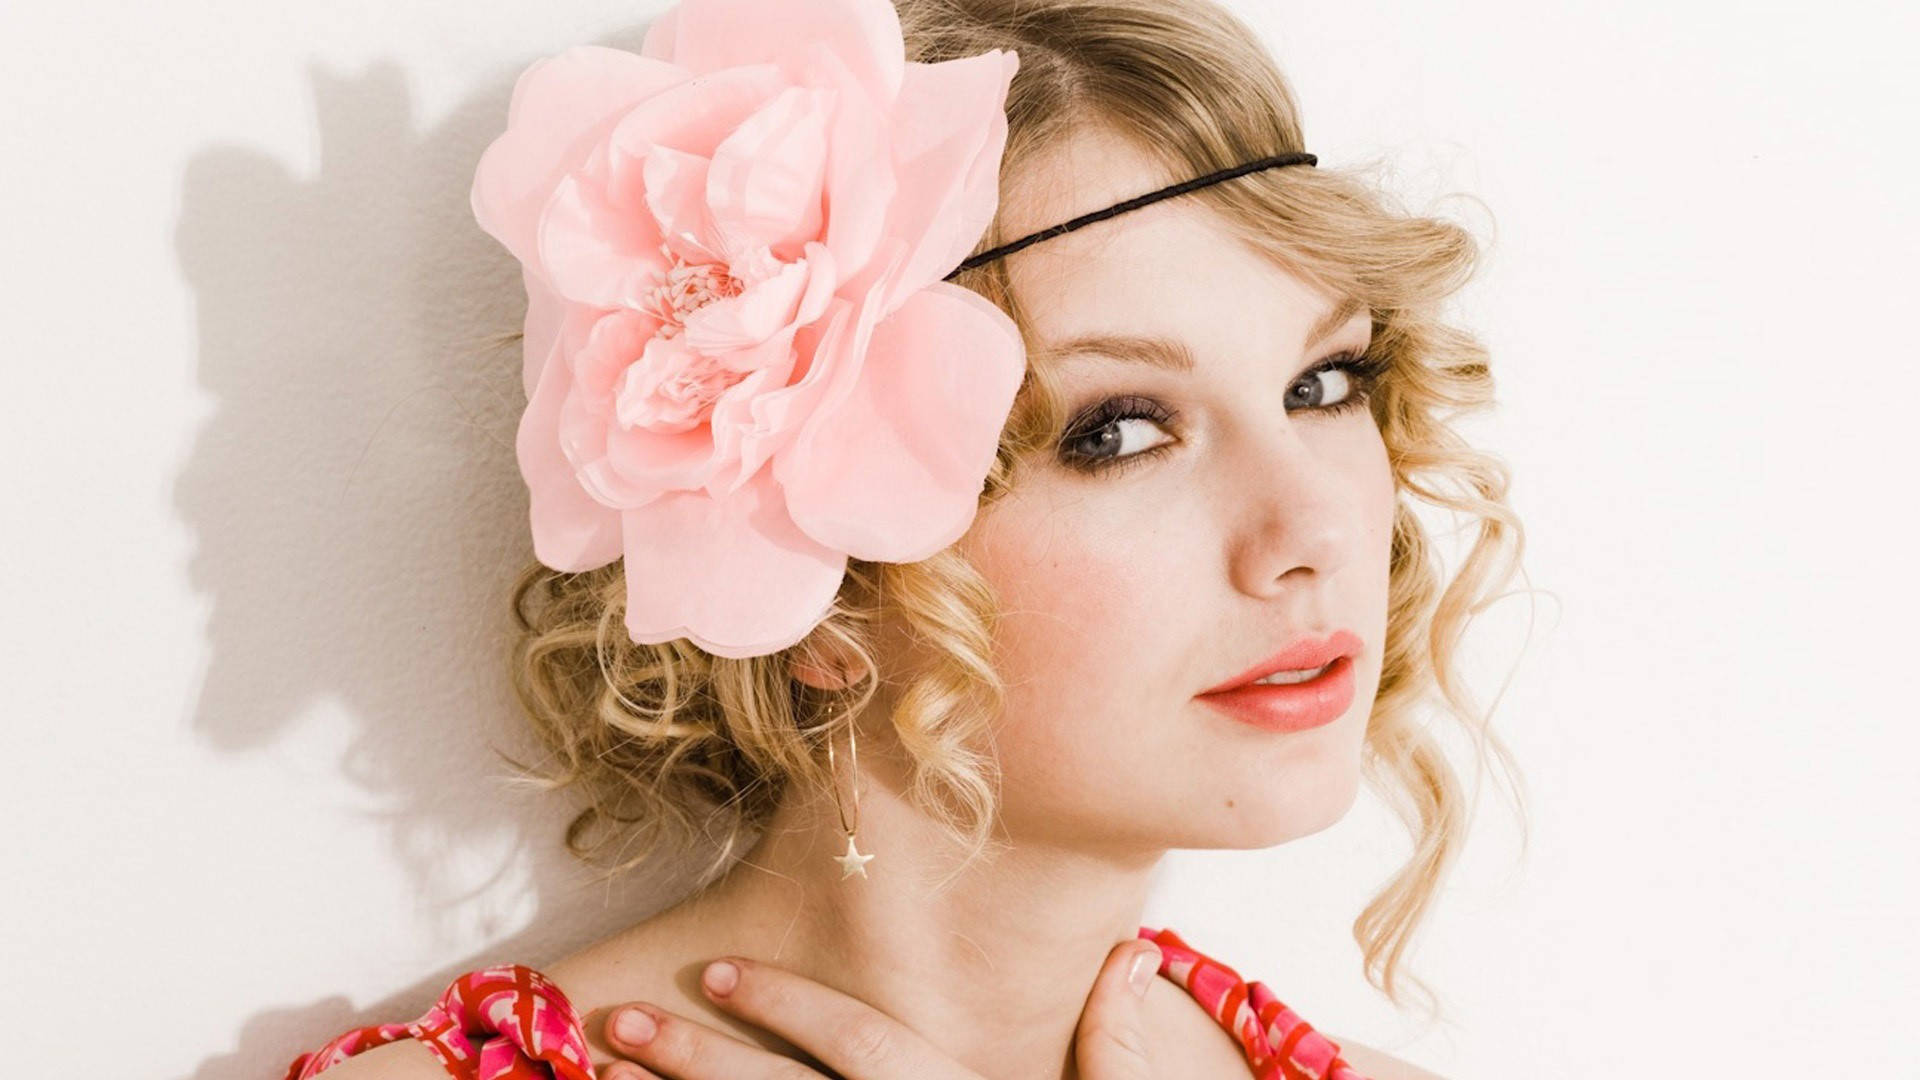 Taylor Swift 1920X1080 Wallpaper and Background Image